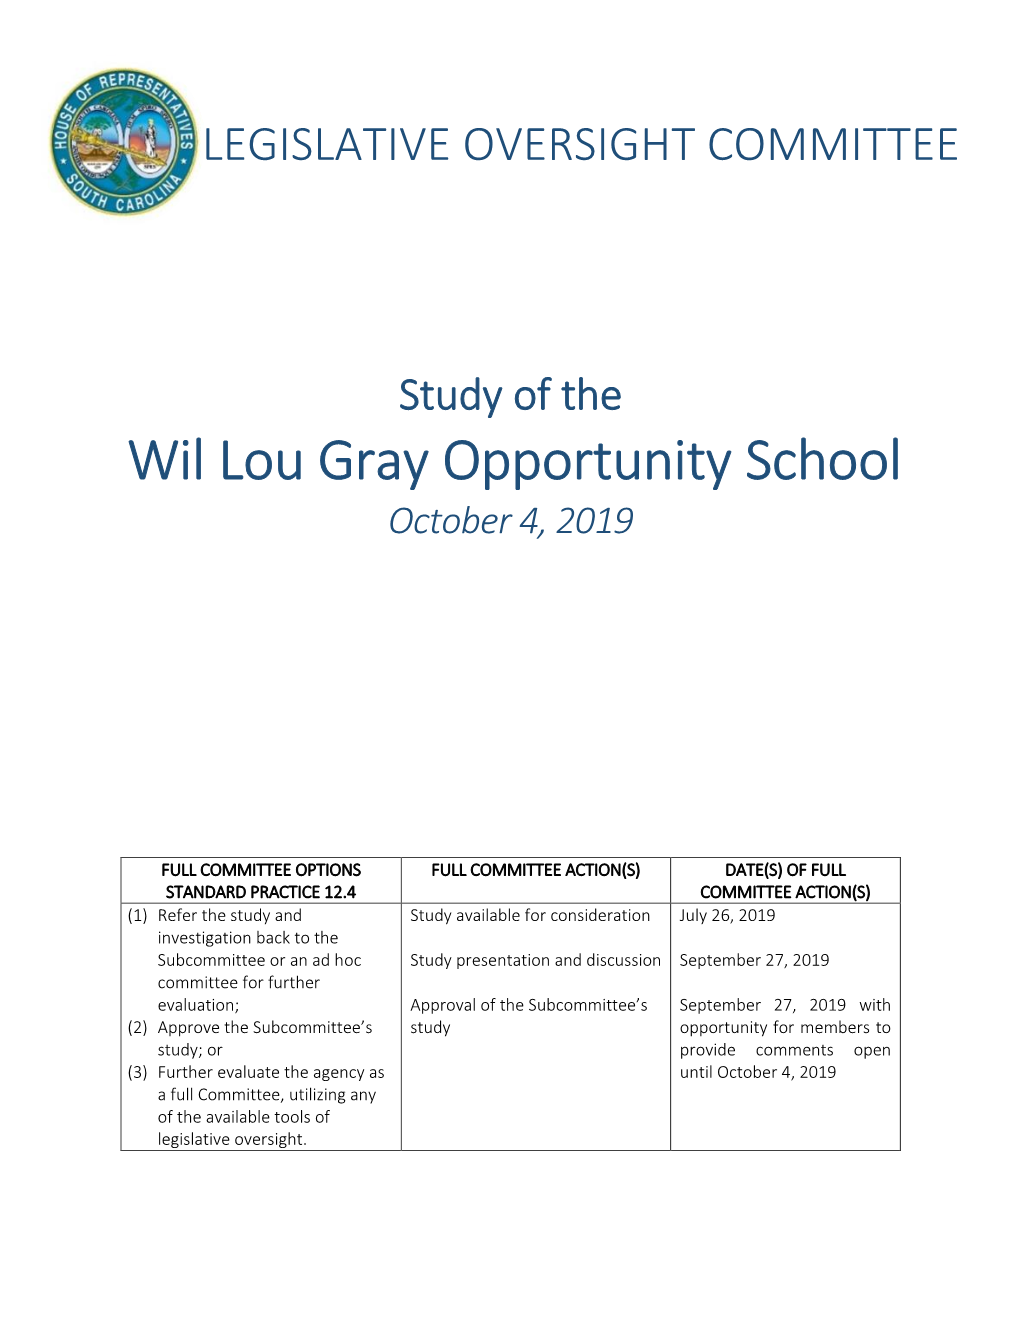 Wil Lou Gray Opportunity School October 4, 2019